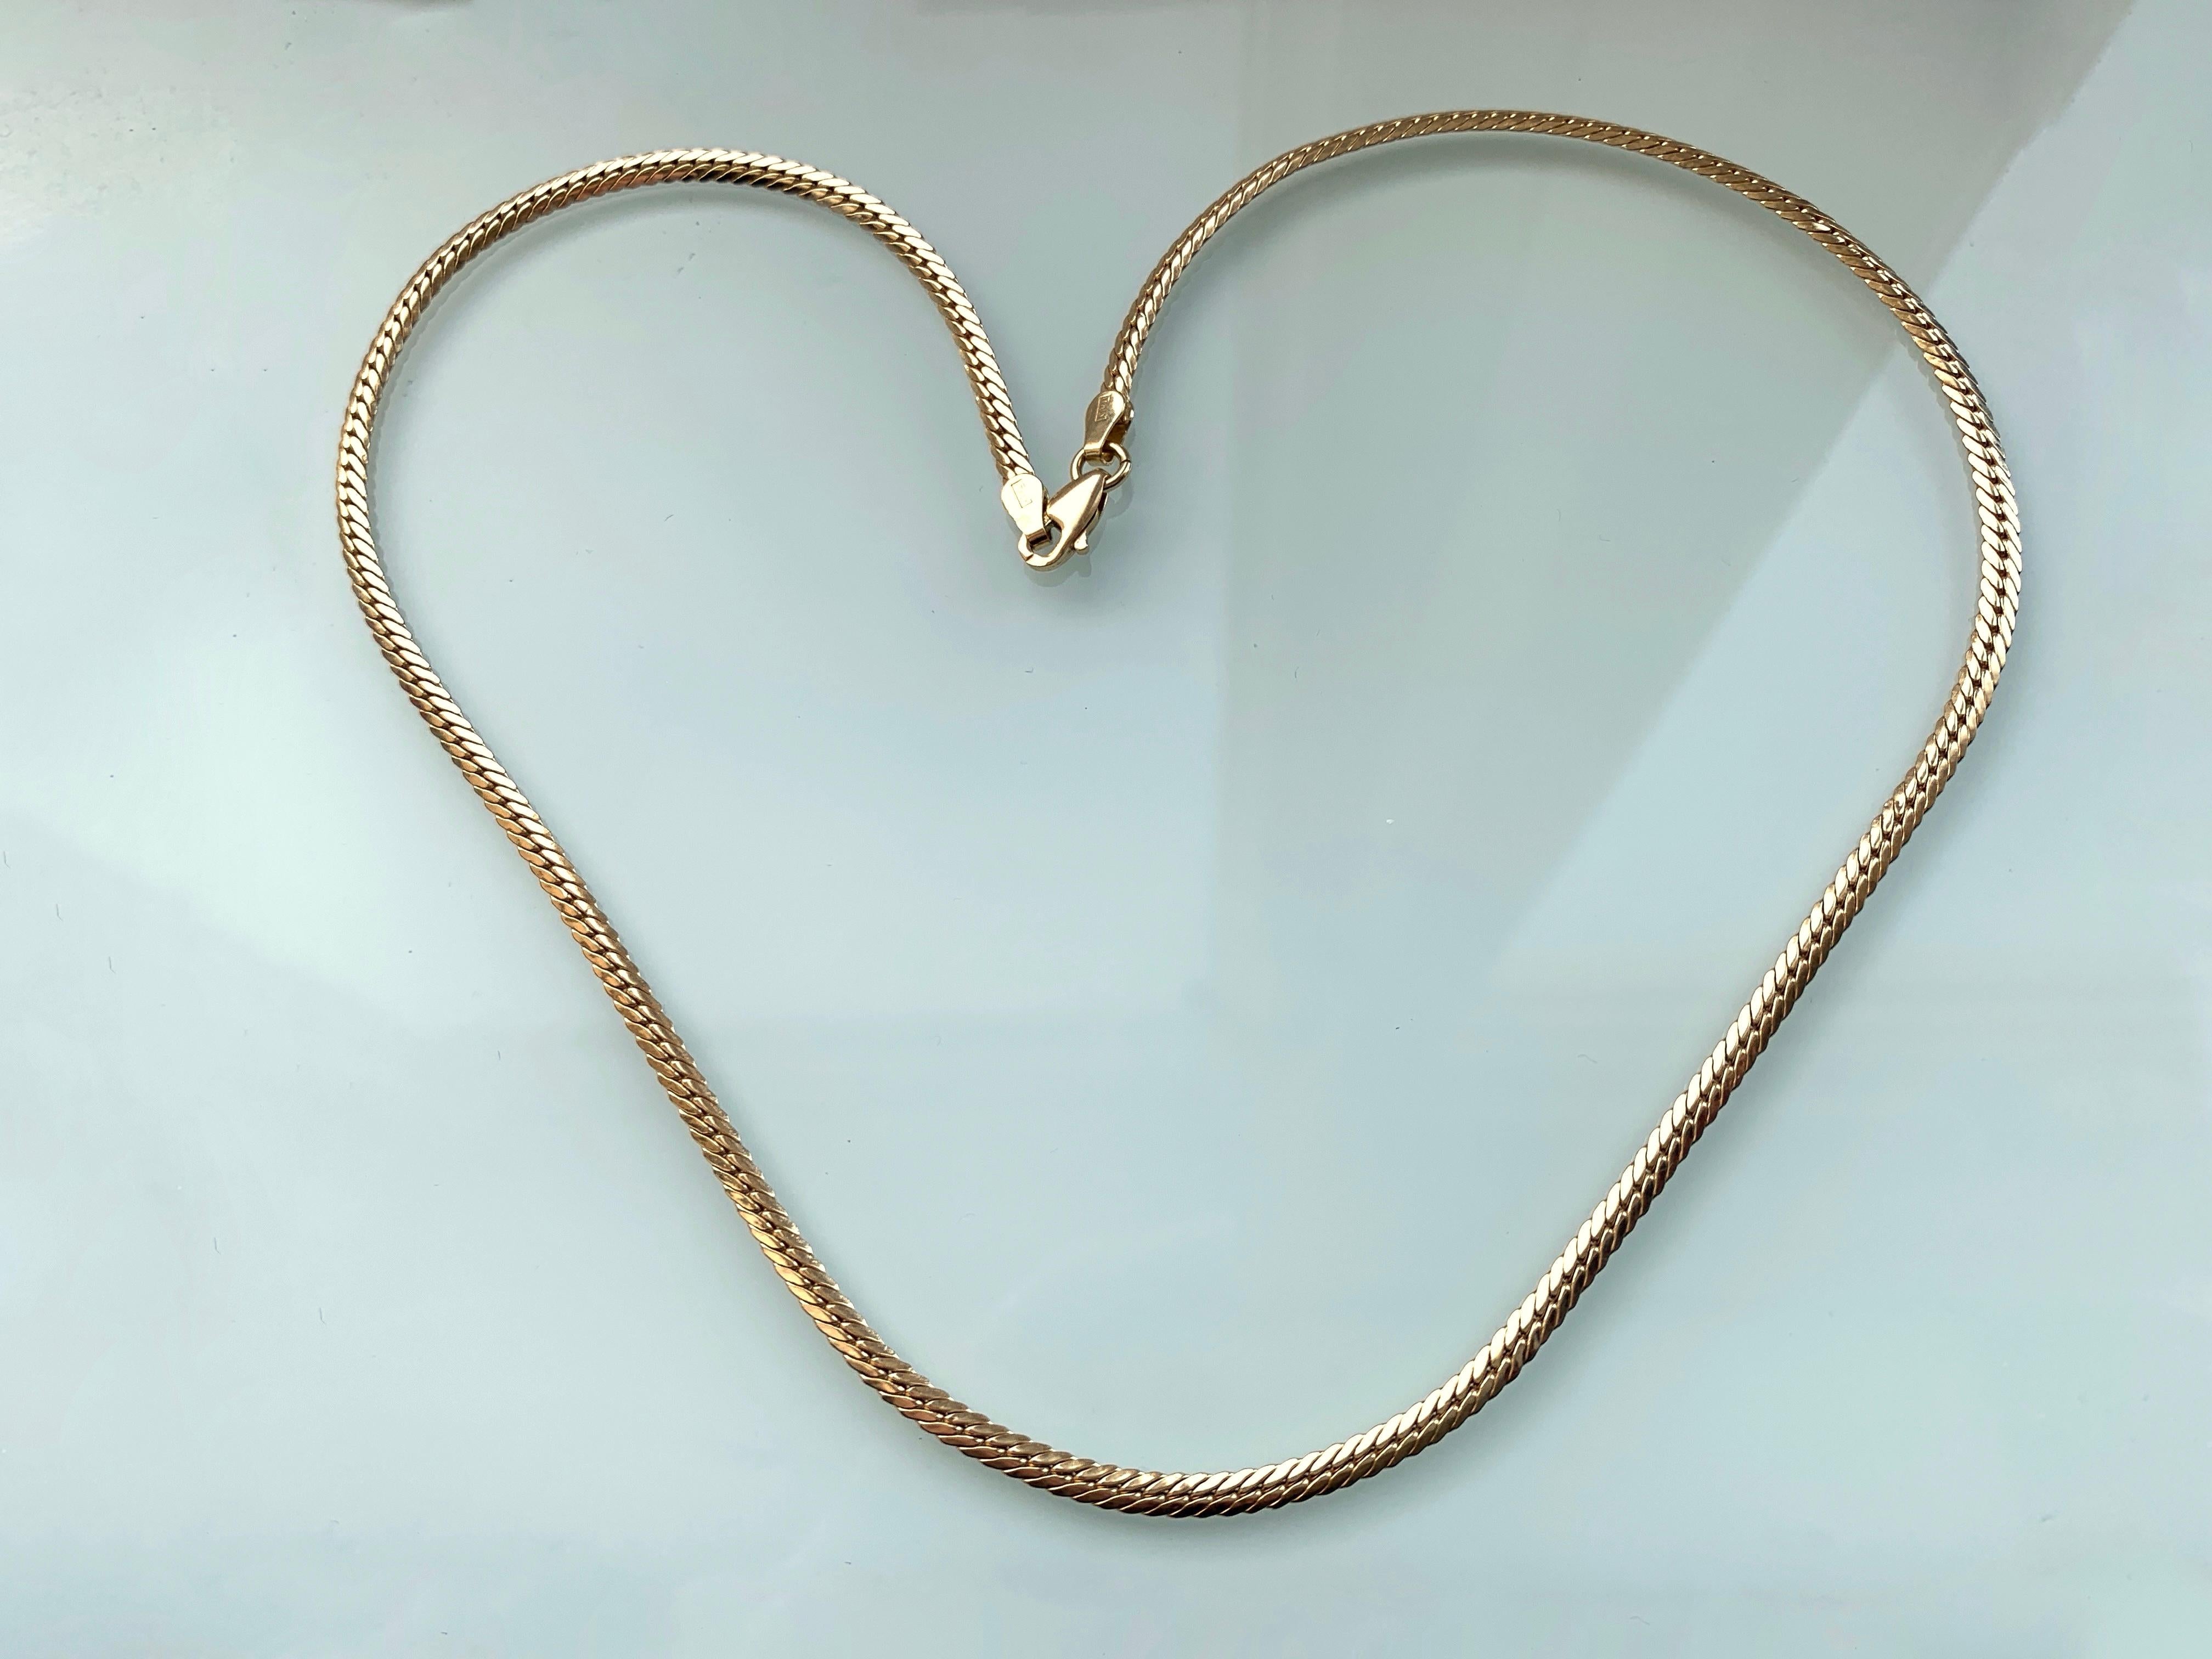 Stunning Flat Snake necklace 
which is 18ct Gold 
made in Egypt exported to Italy
gorgeously luxurious and smooth 
has Egyptian marks which are makers & 18ct Gold stamps
Length 17 Inches 
Thickness 3mm